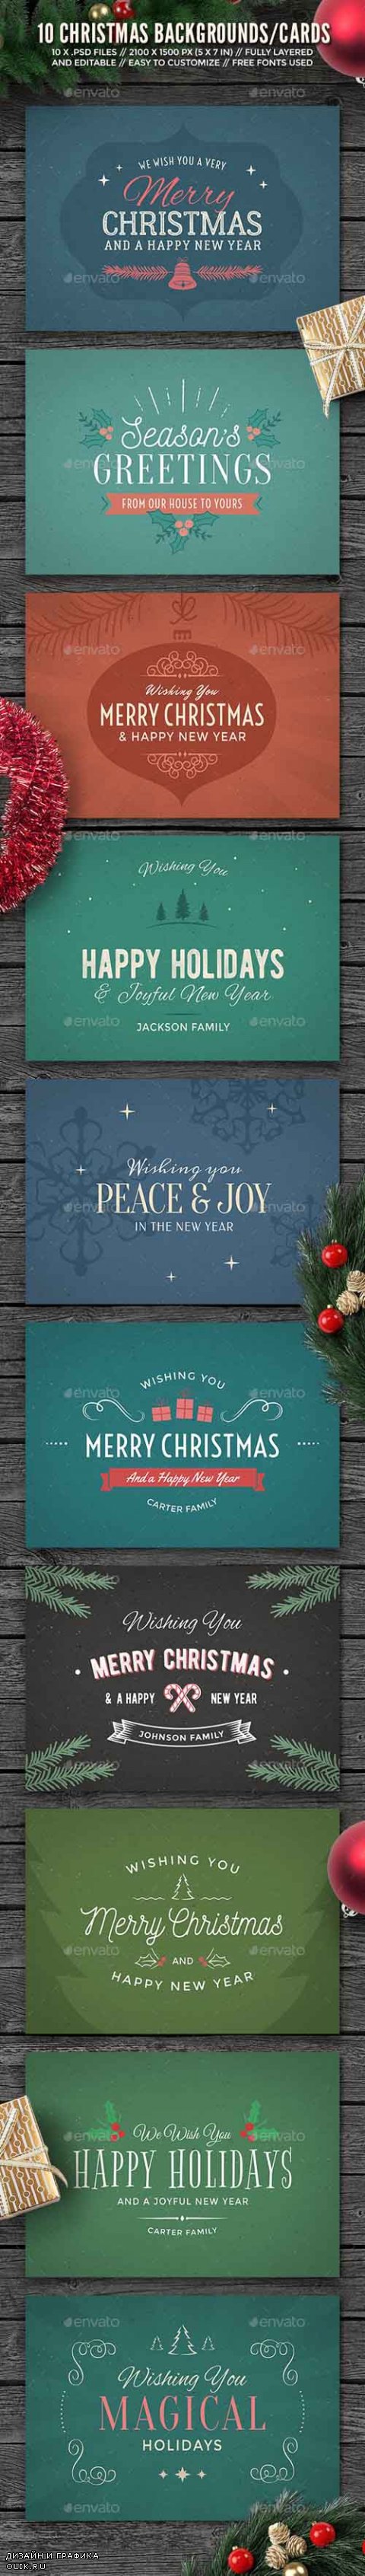 10 Christmas Backgrounds/Cards 13905872